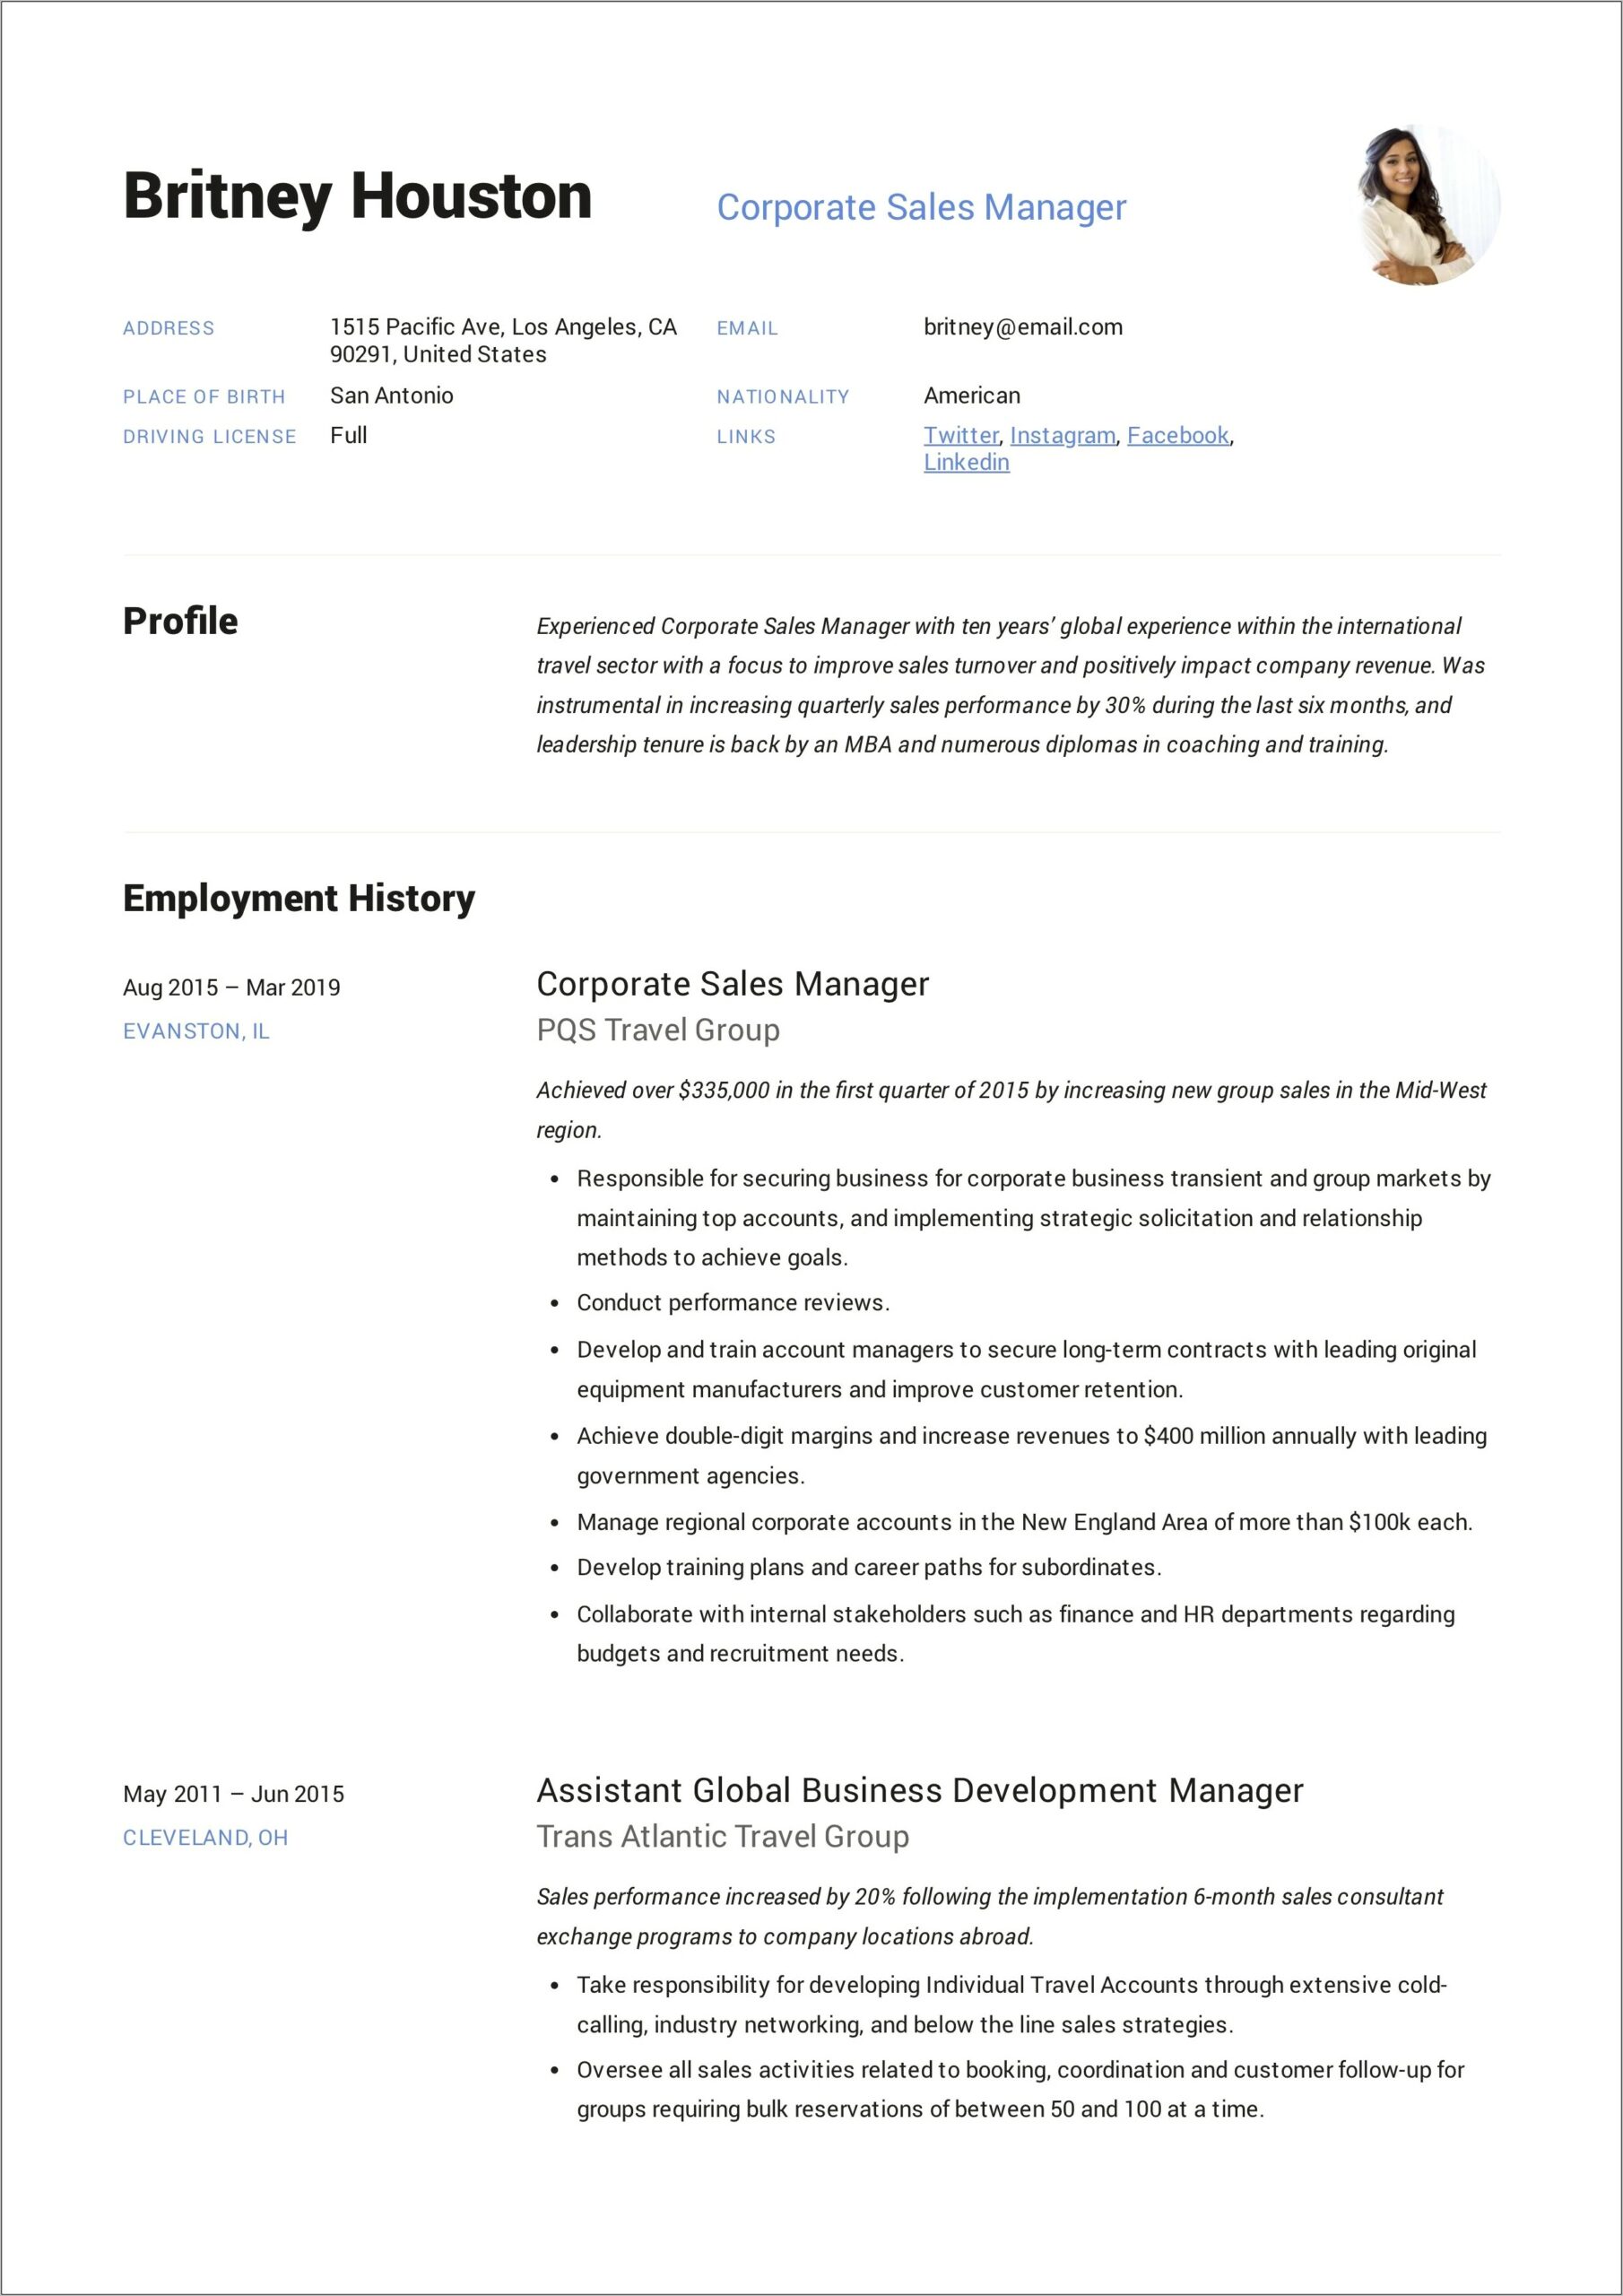 Resume Format For Industrial Sales Manager